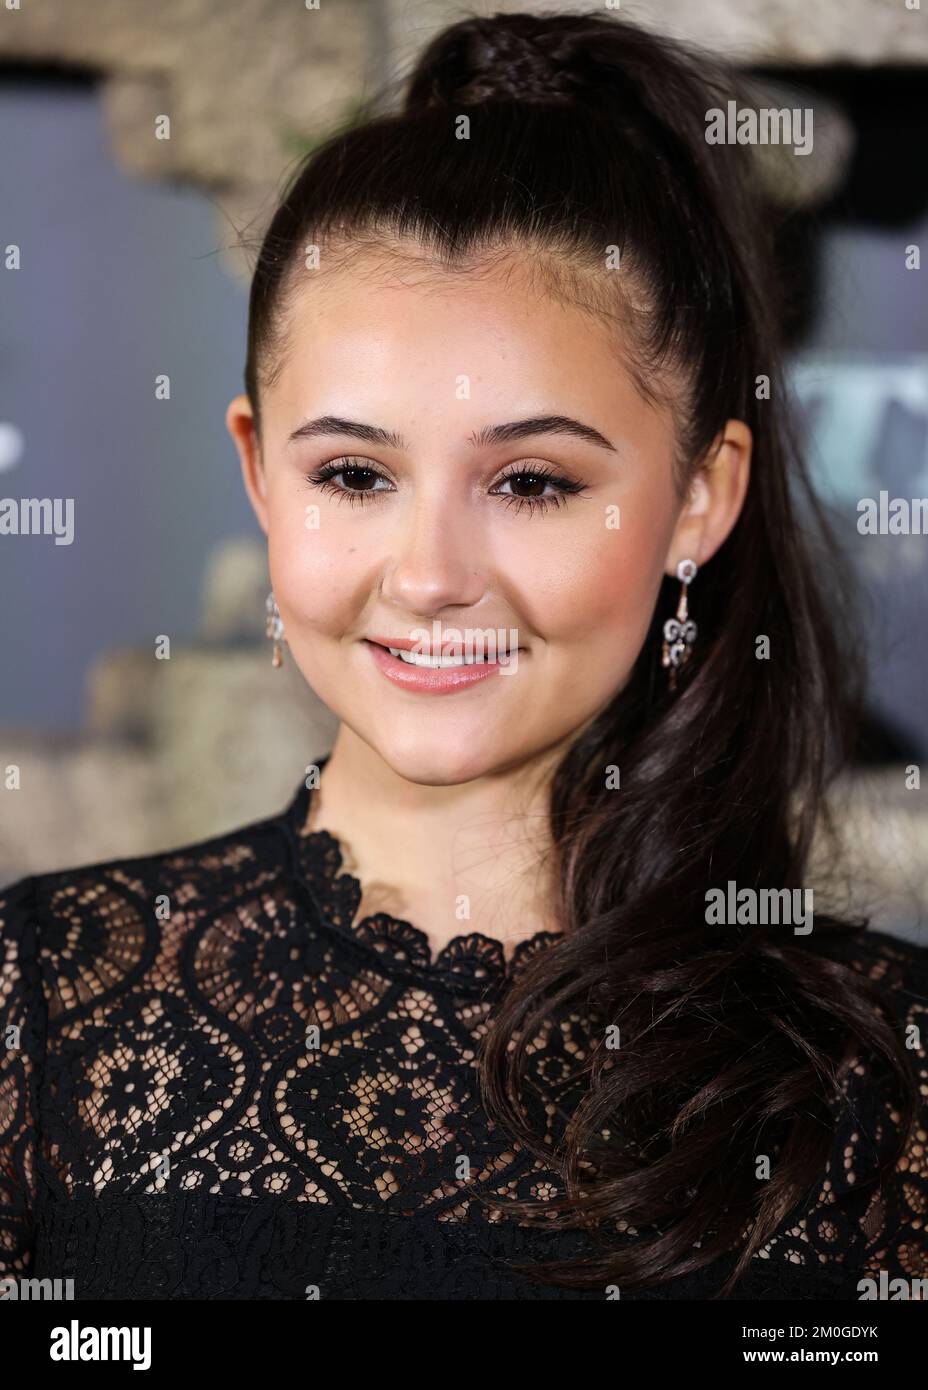 Hollywood, United States. 05th Dec, 2022. HOLLYWOOD, LOS ANGELES, CALIFORNIA, USA - DECEMBER 05: Eva Ariel Binder arrives at the Disney  Original Series 'National Treasure: Edge Of History' Season 1 Red Carpet Event held at the El Capitan Theatre on December 5, 2022 in Hollywood, Los Angeles, California, United States. (Photo by Xavier Collin/Image Press Agency) Credit: Image Press Agency/Alamy Live News Stock Photo